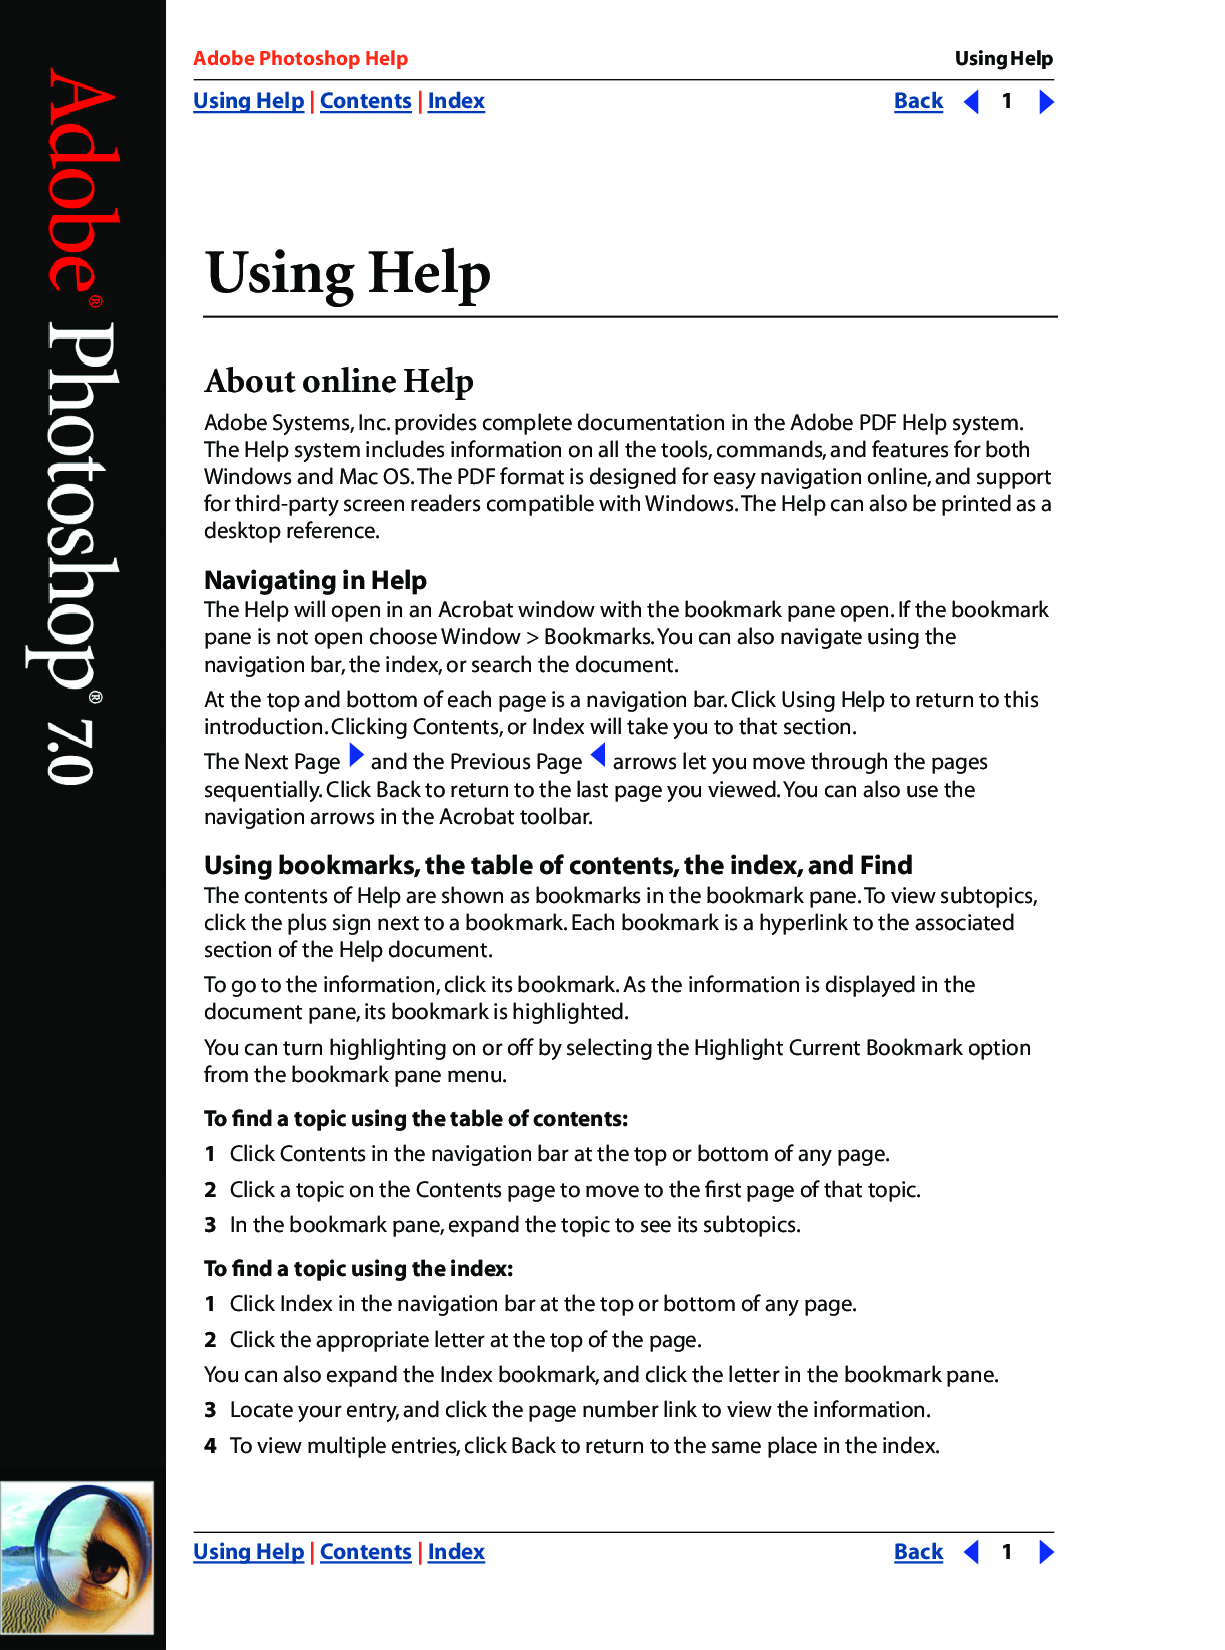 adobe imageready 7.0 requirements